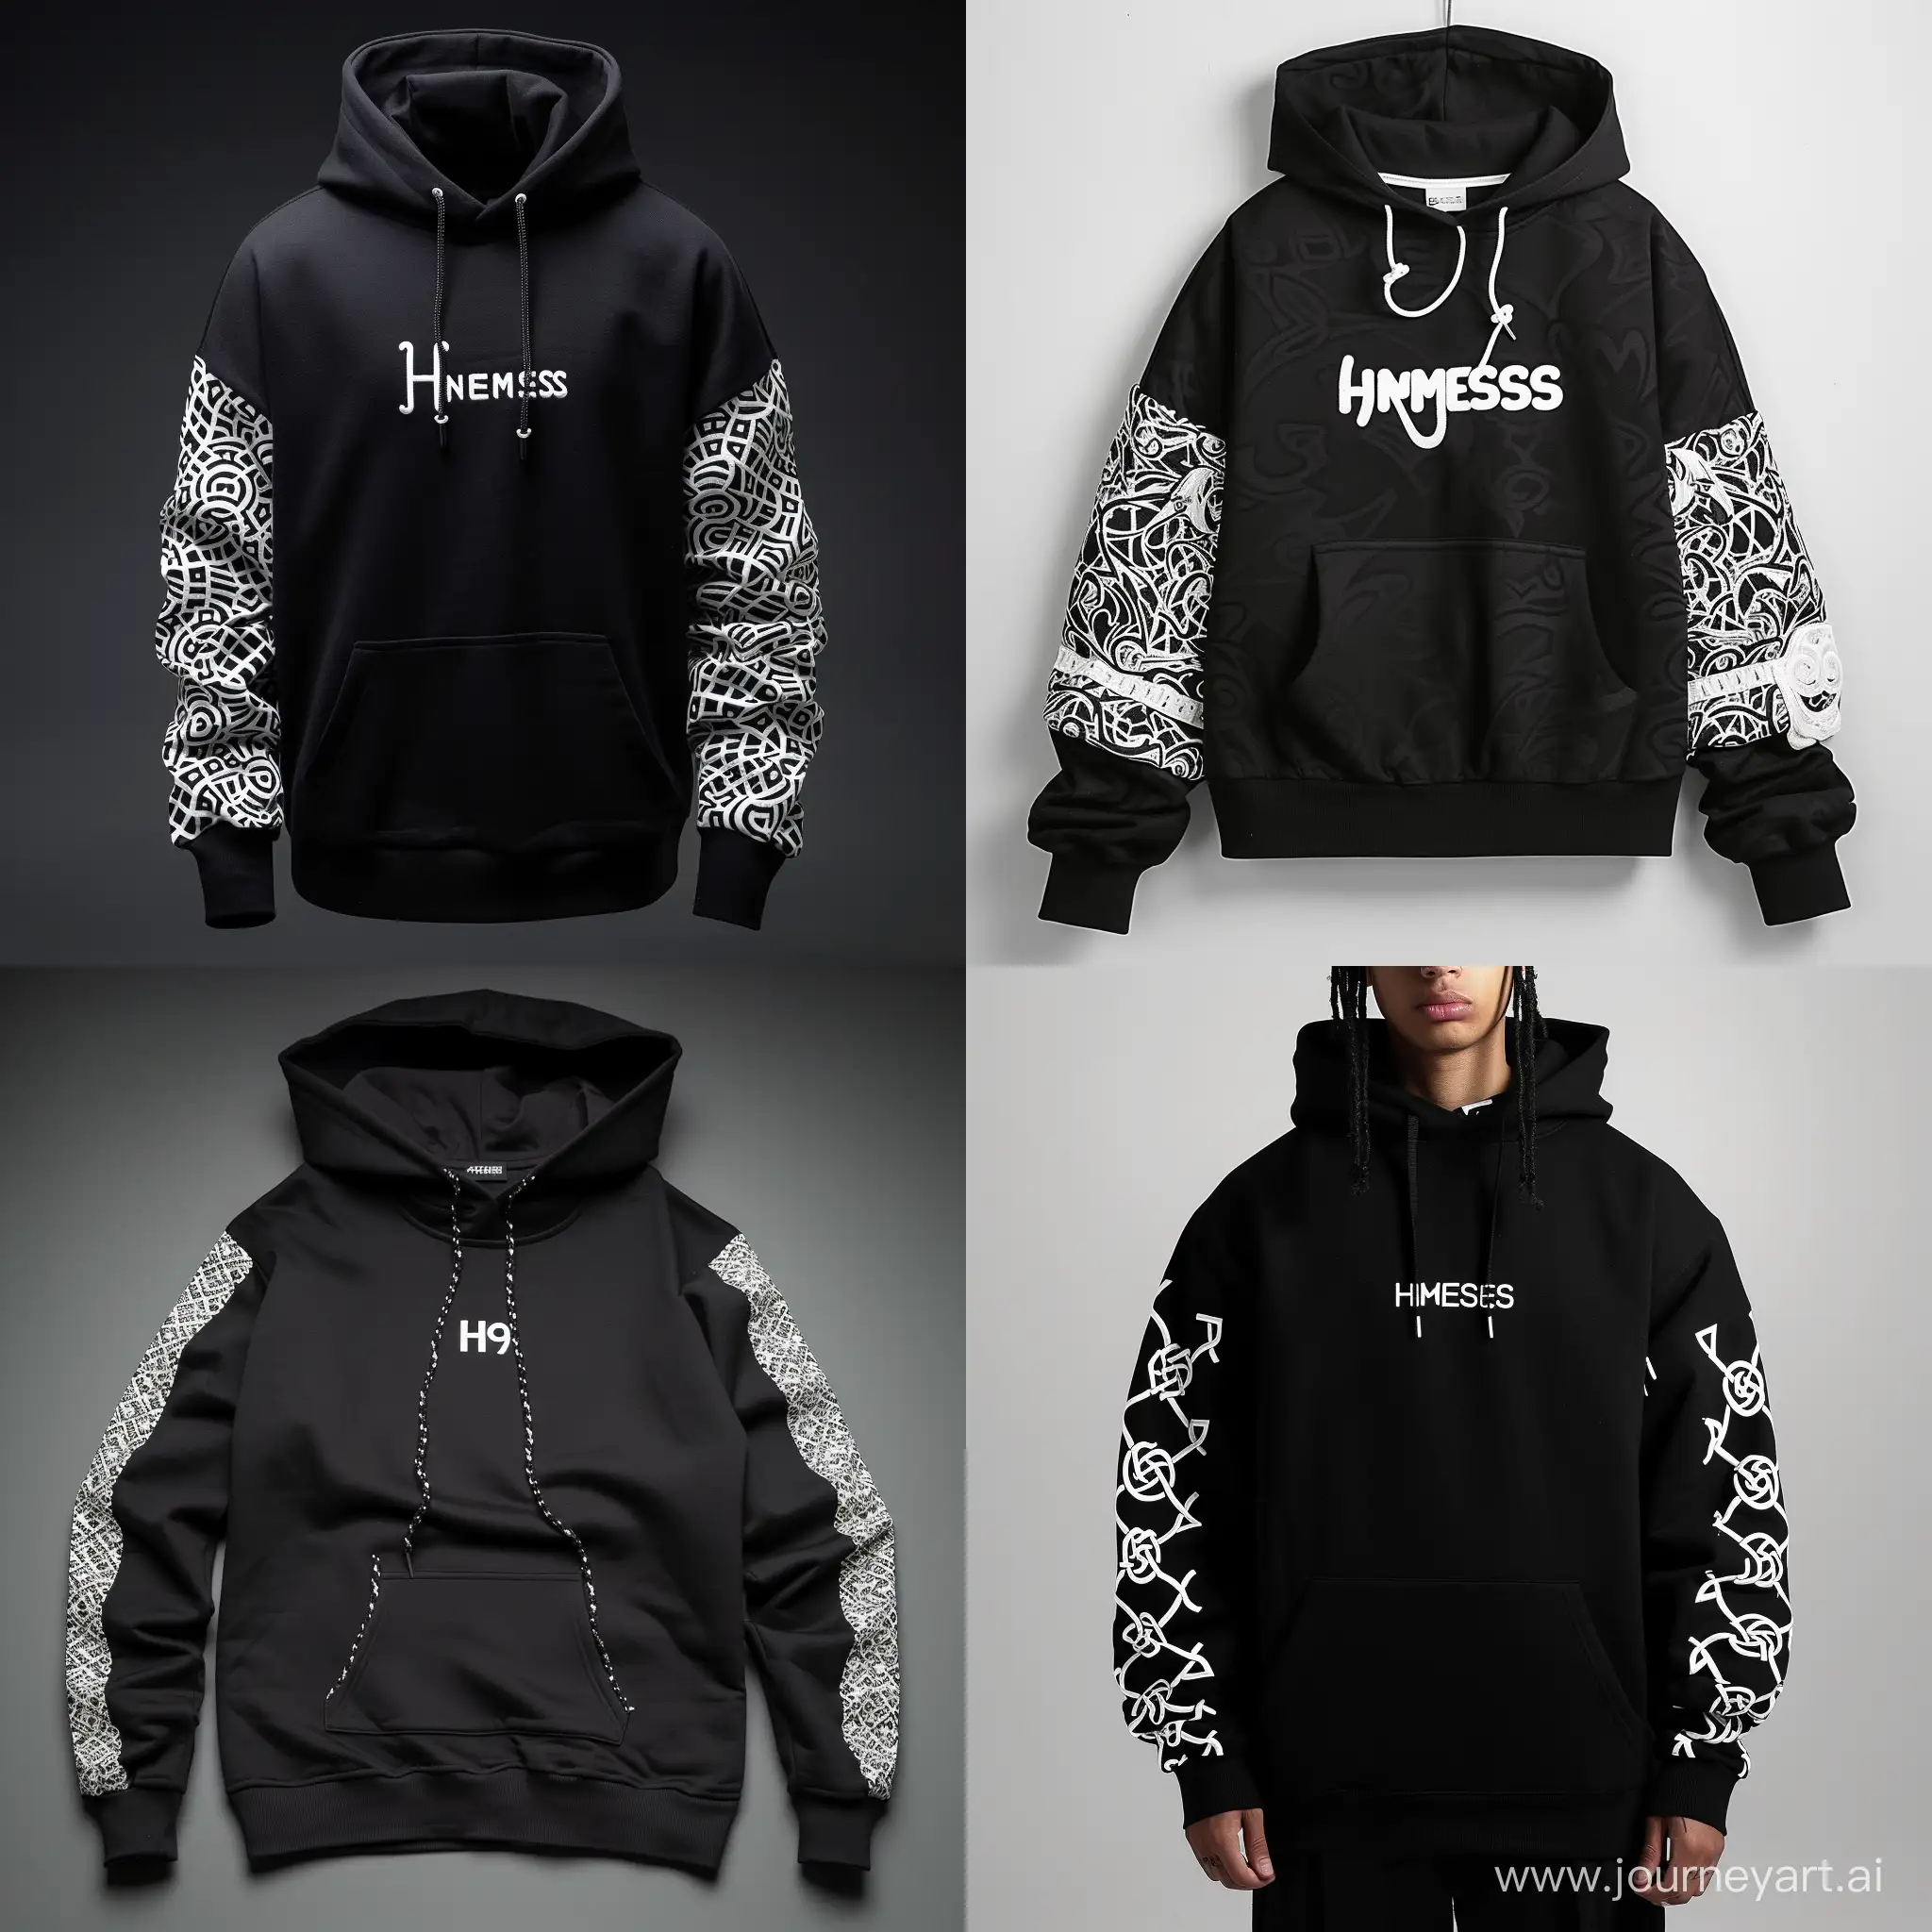 a black hoodie with white patterns on the sleeves and a white embroidered inscription "h9nemesis", emphasizing the individuality of the model. the inscription should be executed in a font imitating a letter